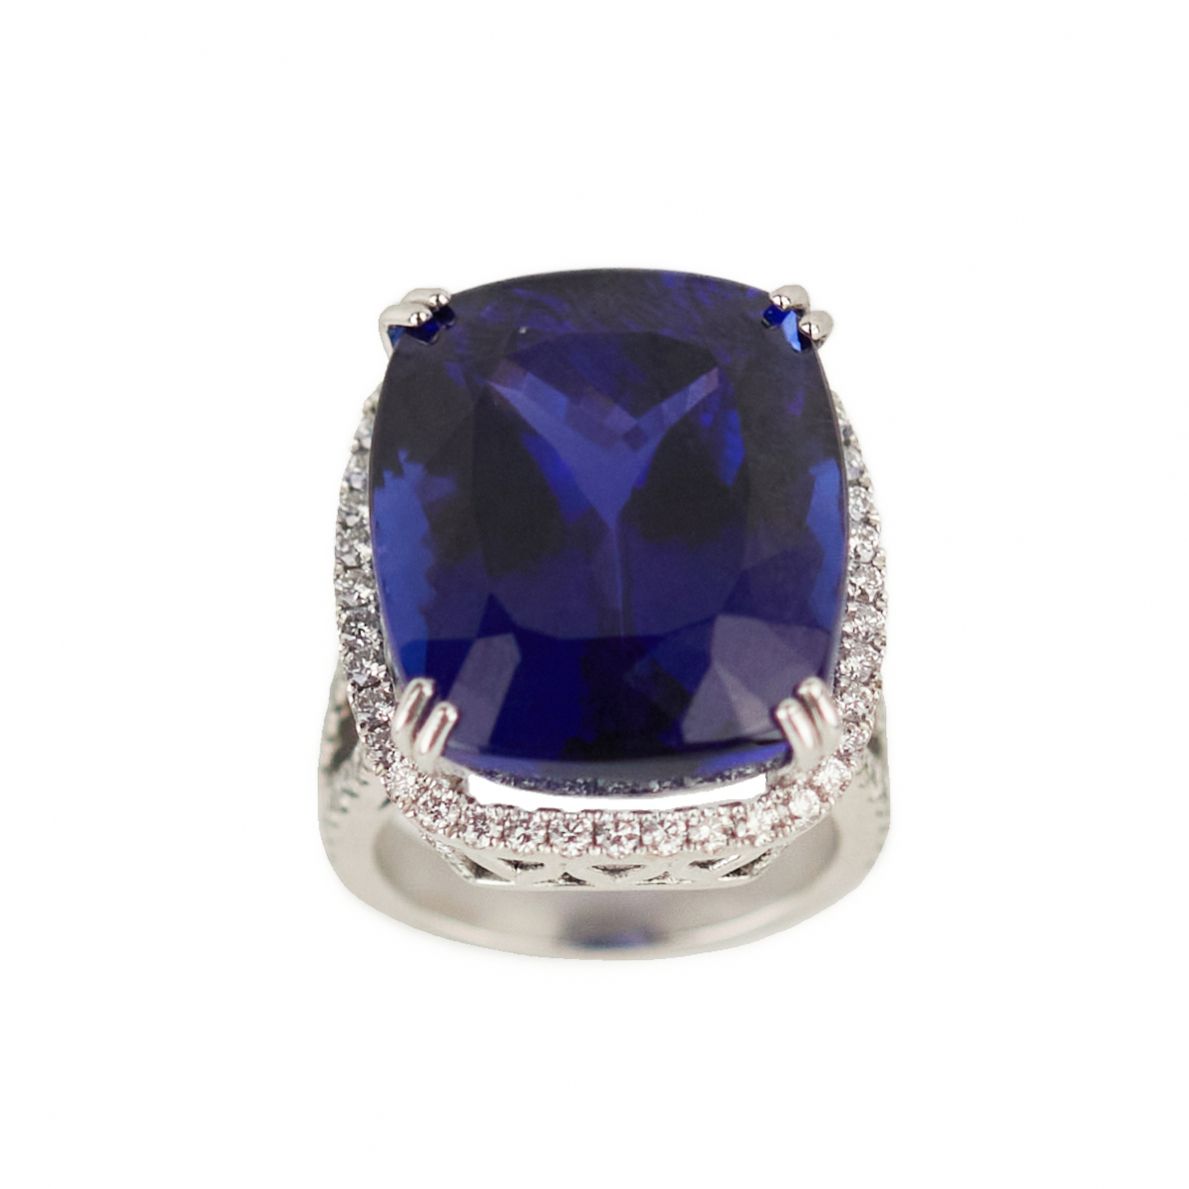 Gold ring with tanzanite and diamonds. - Image 2 of 5